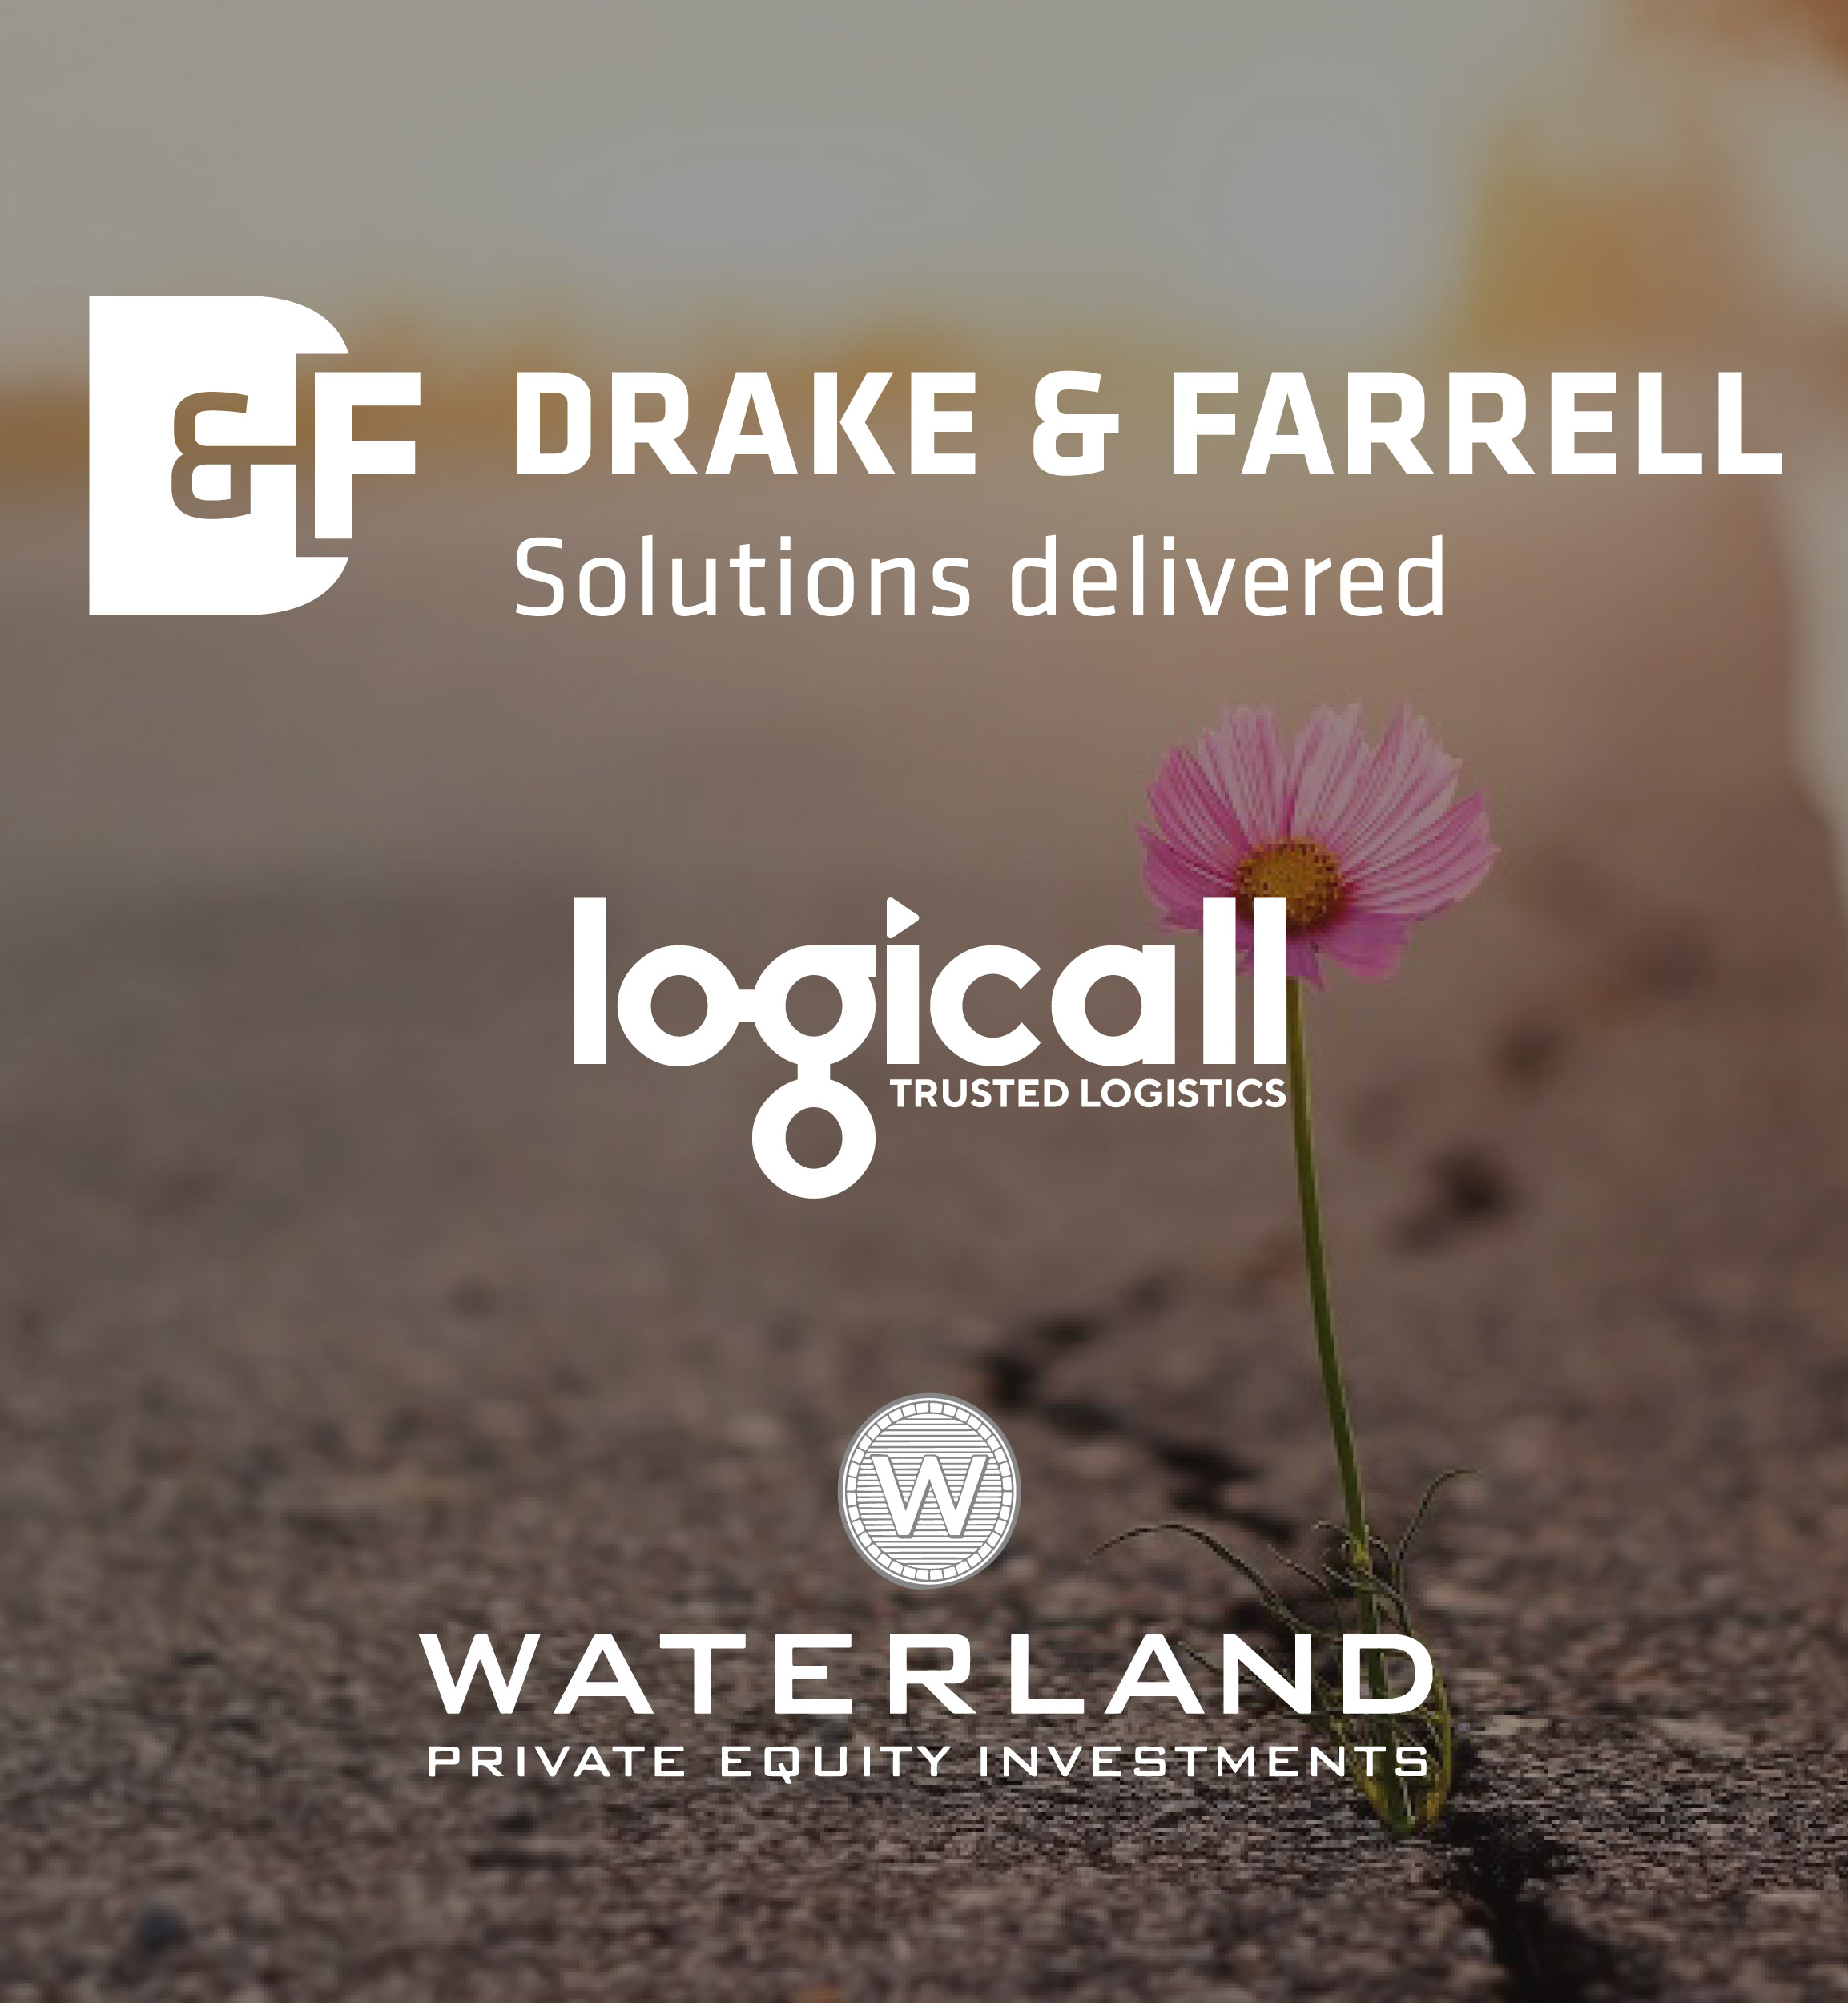 DEX international M&A advised at the sale of Drake & Farrell B.V to Logicall, a portfolio company of Waterland Private Equity